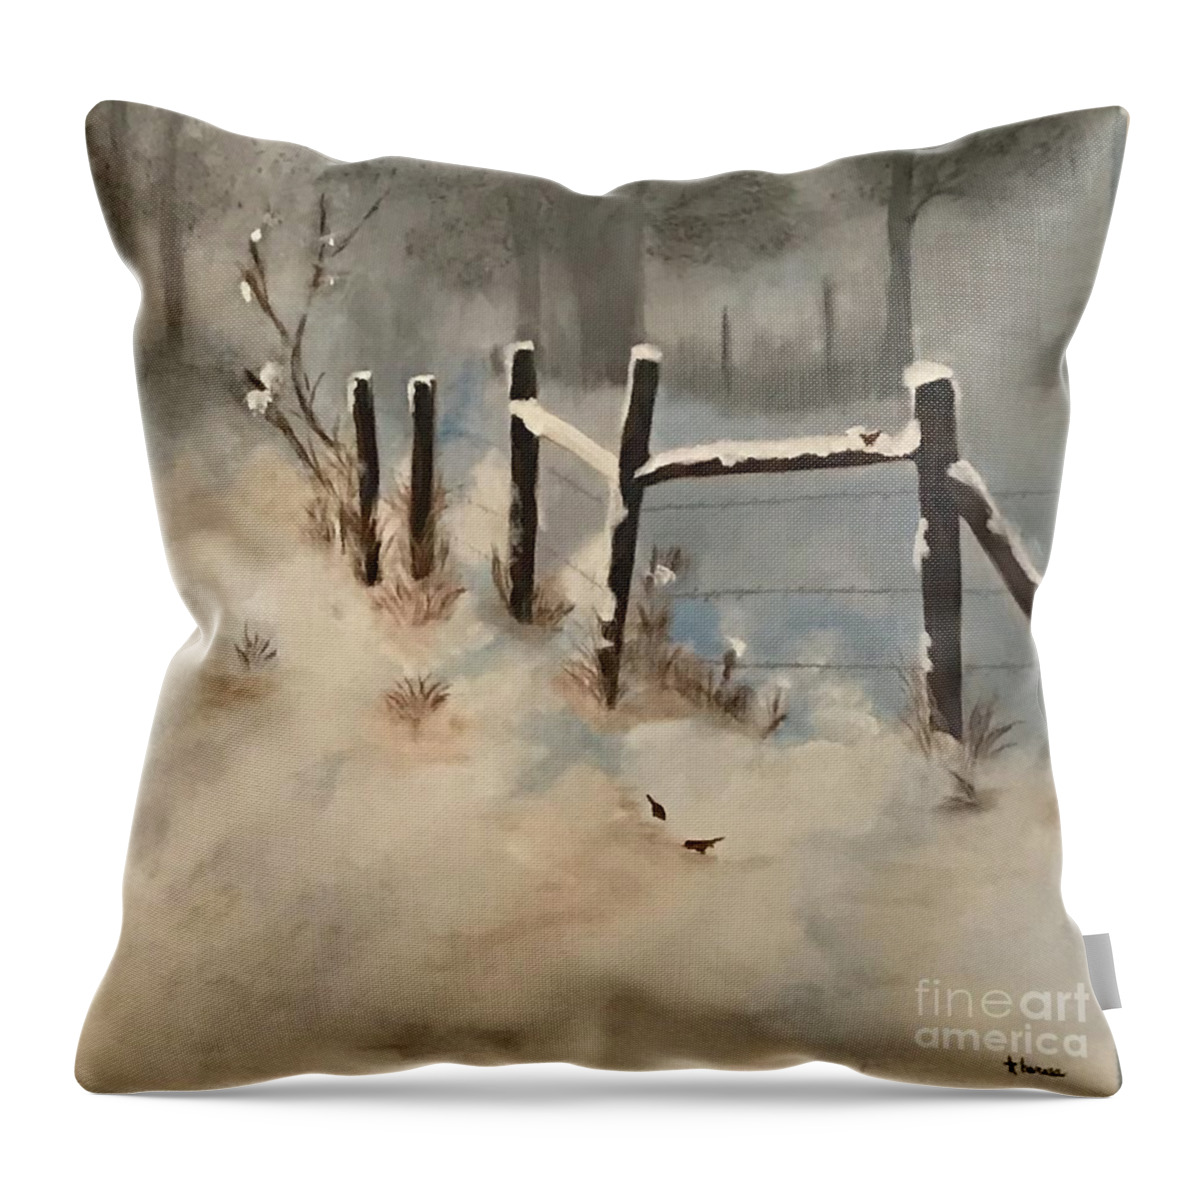 Original Art Work Throw Pillow featuring the painting Winter's Meadow - Original Oil Painting by Theresa Honeycheck